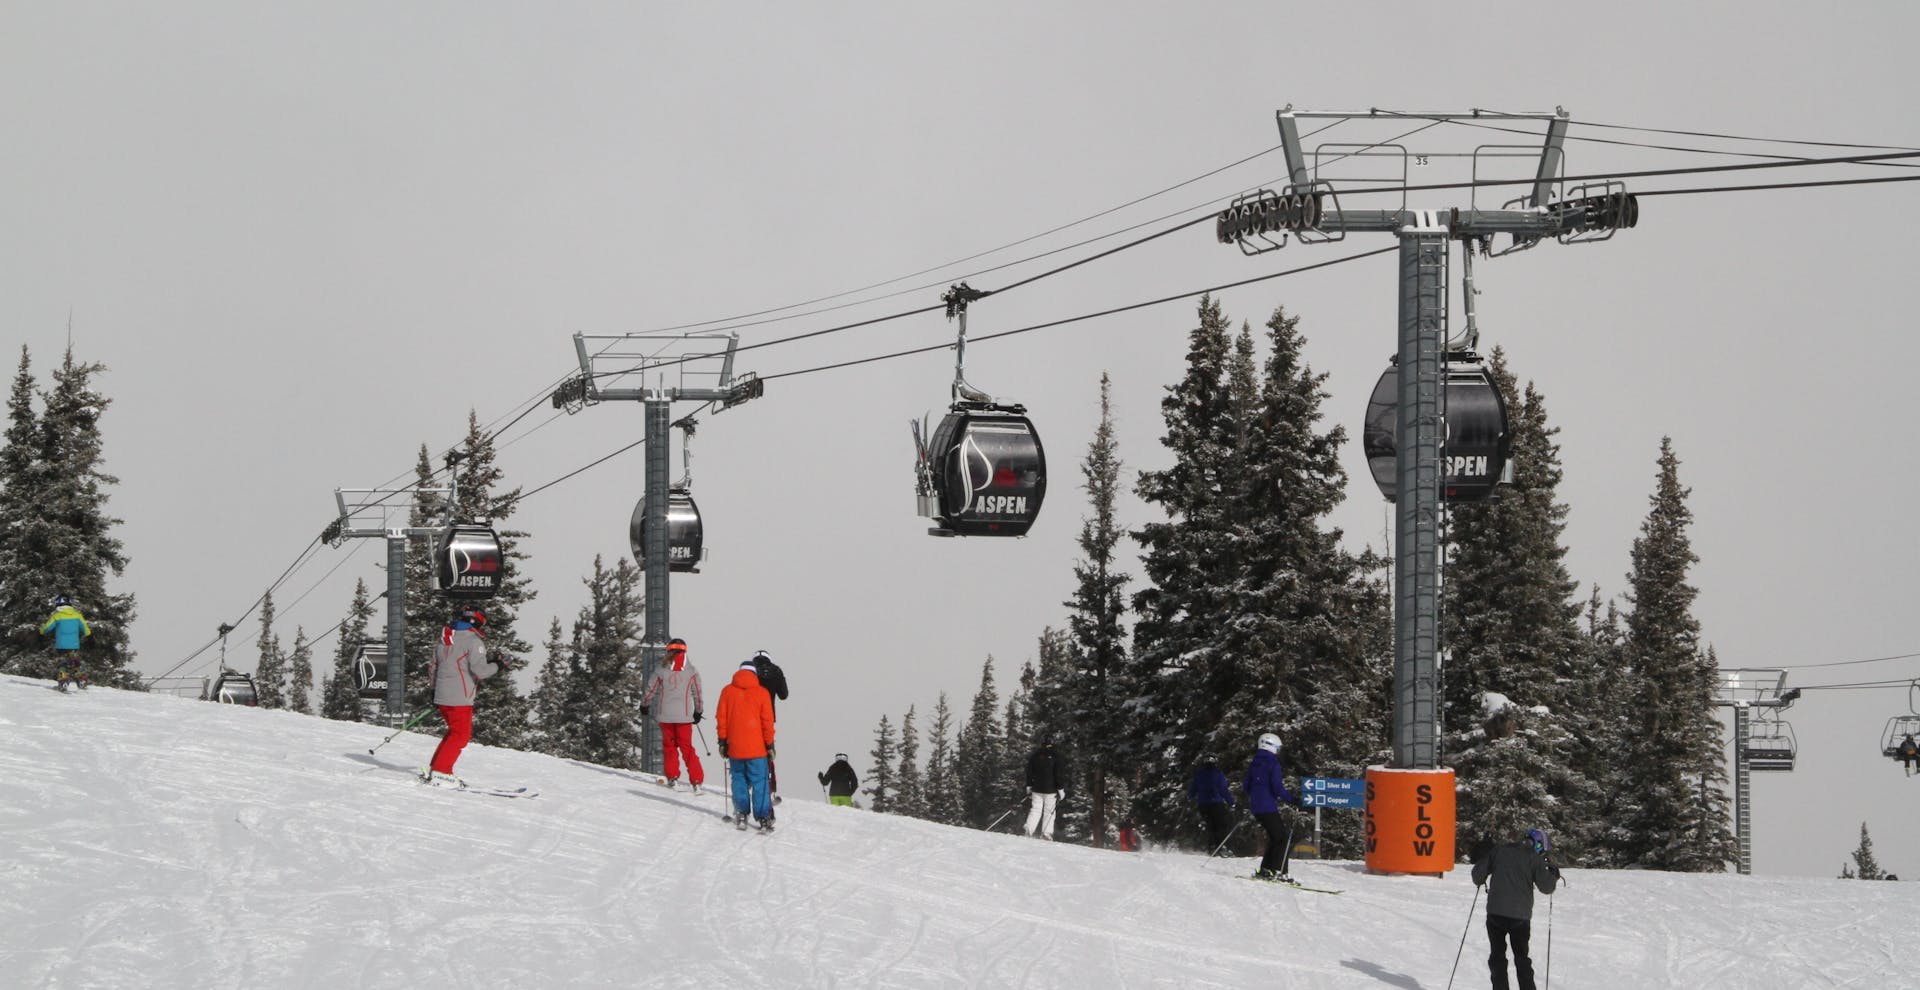 Aspen mountain and chairlift